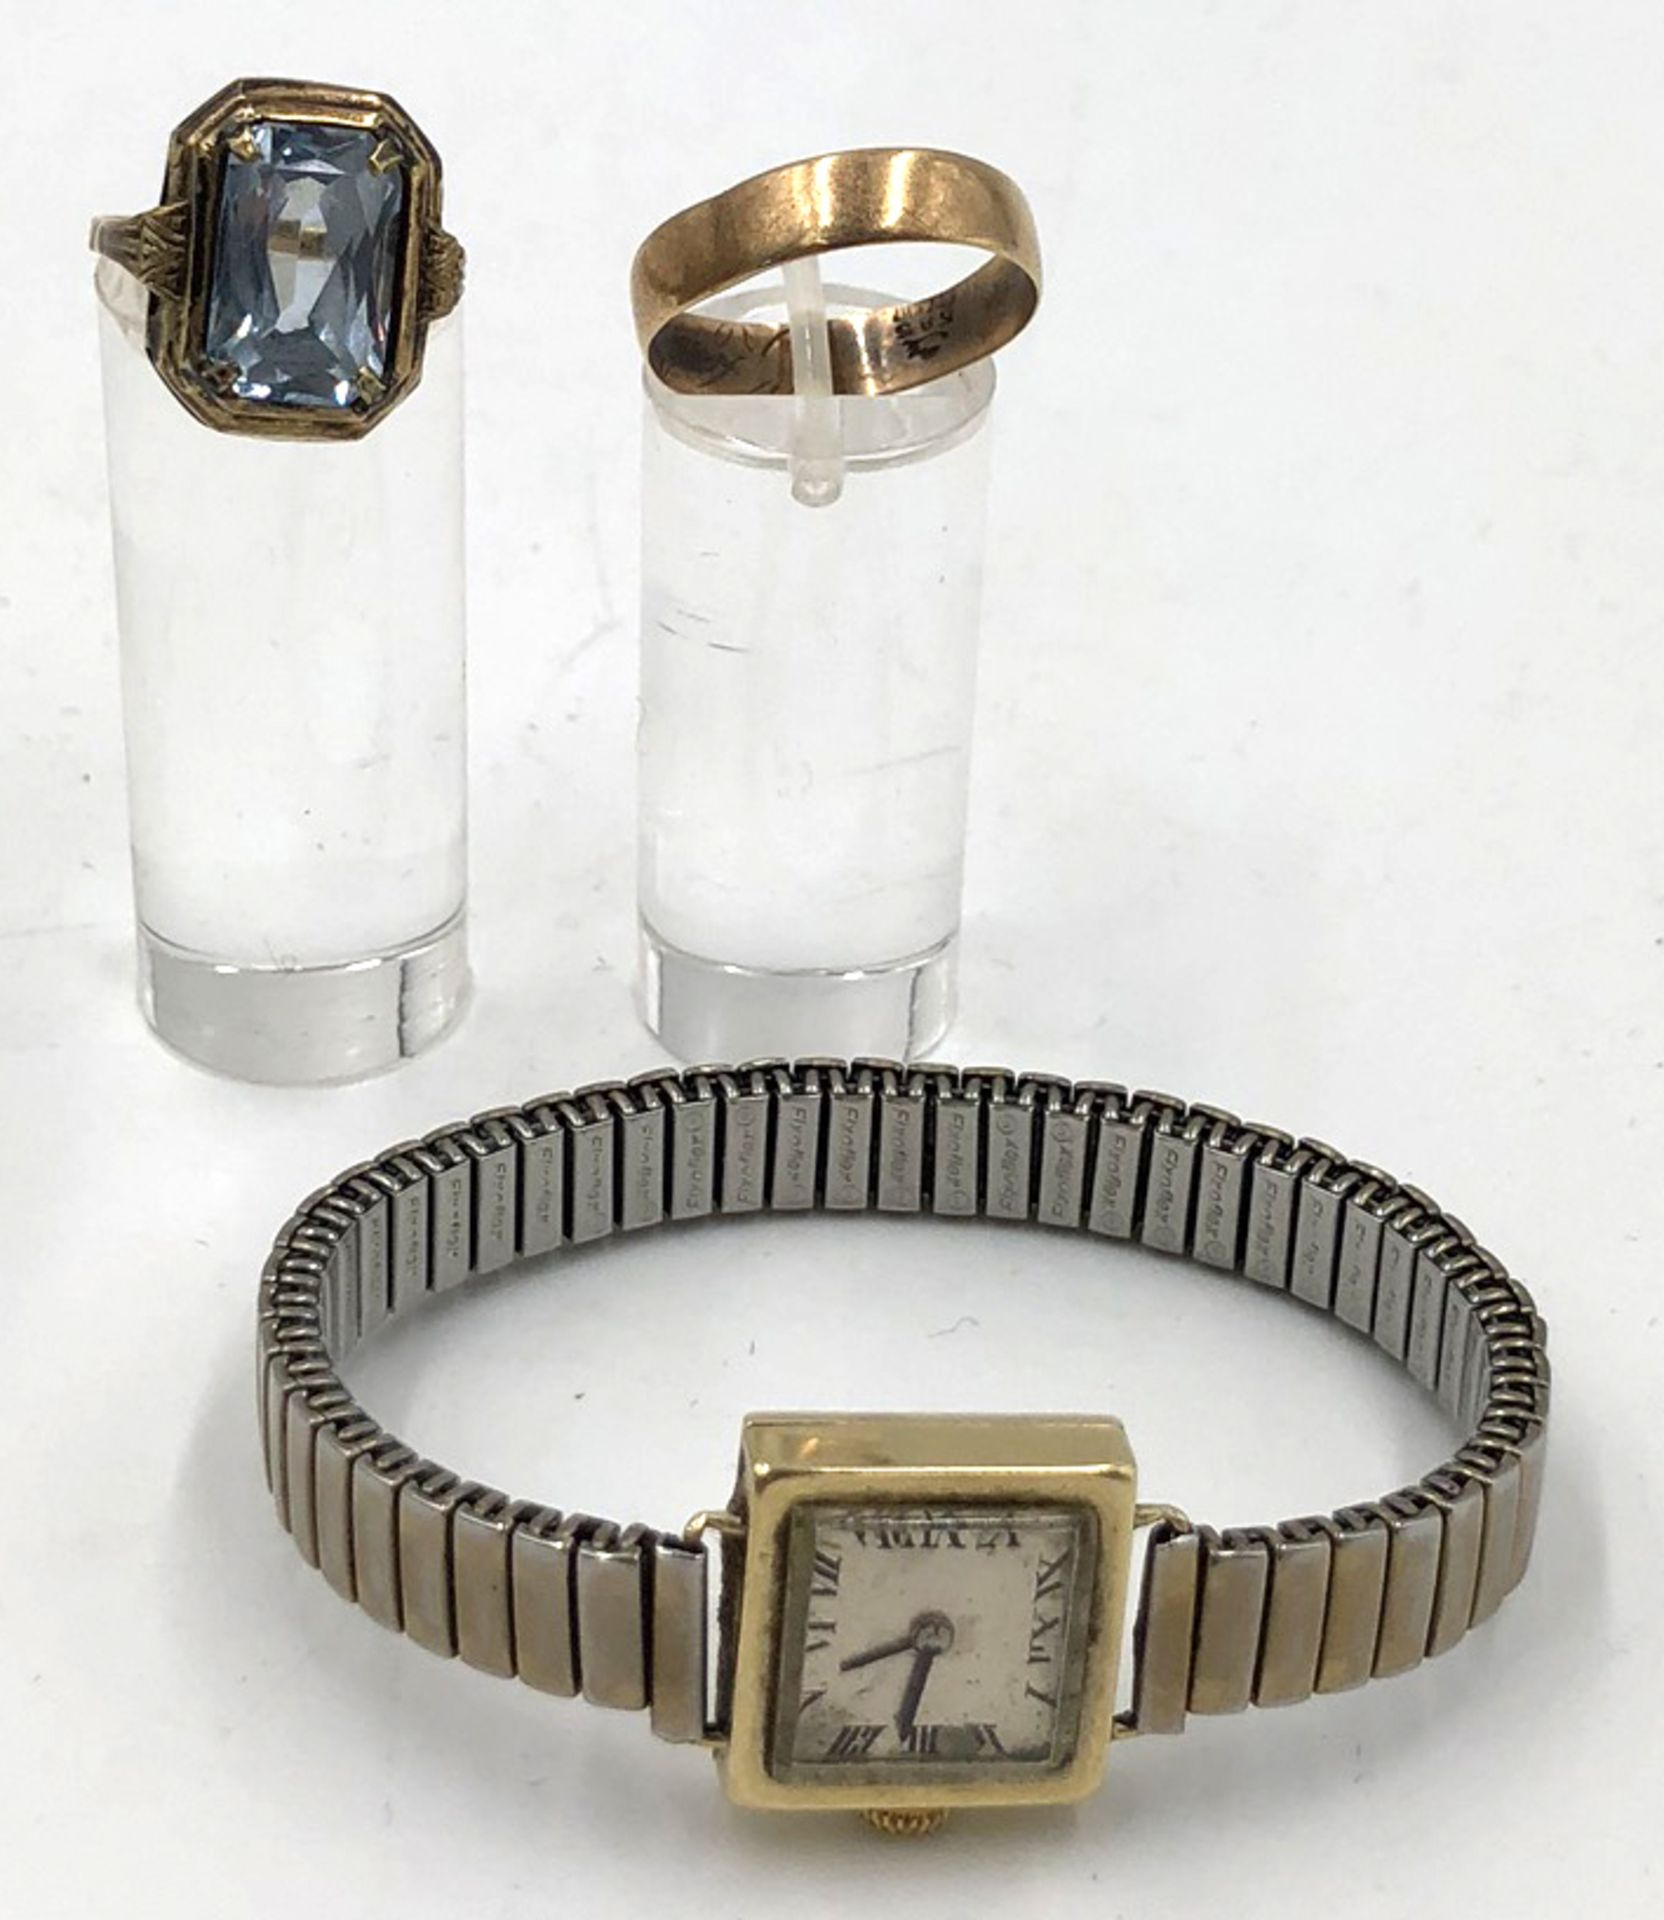 585 - 14 carat gold. Ring with topaz? Wedding ring. Wrist watch.The ring with the blue Art Nouveau